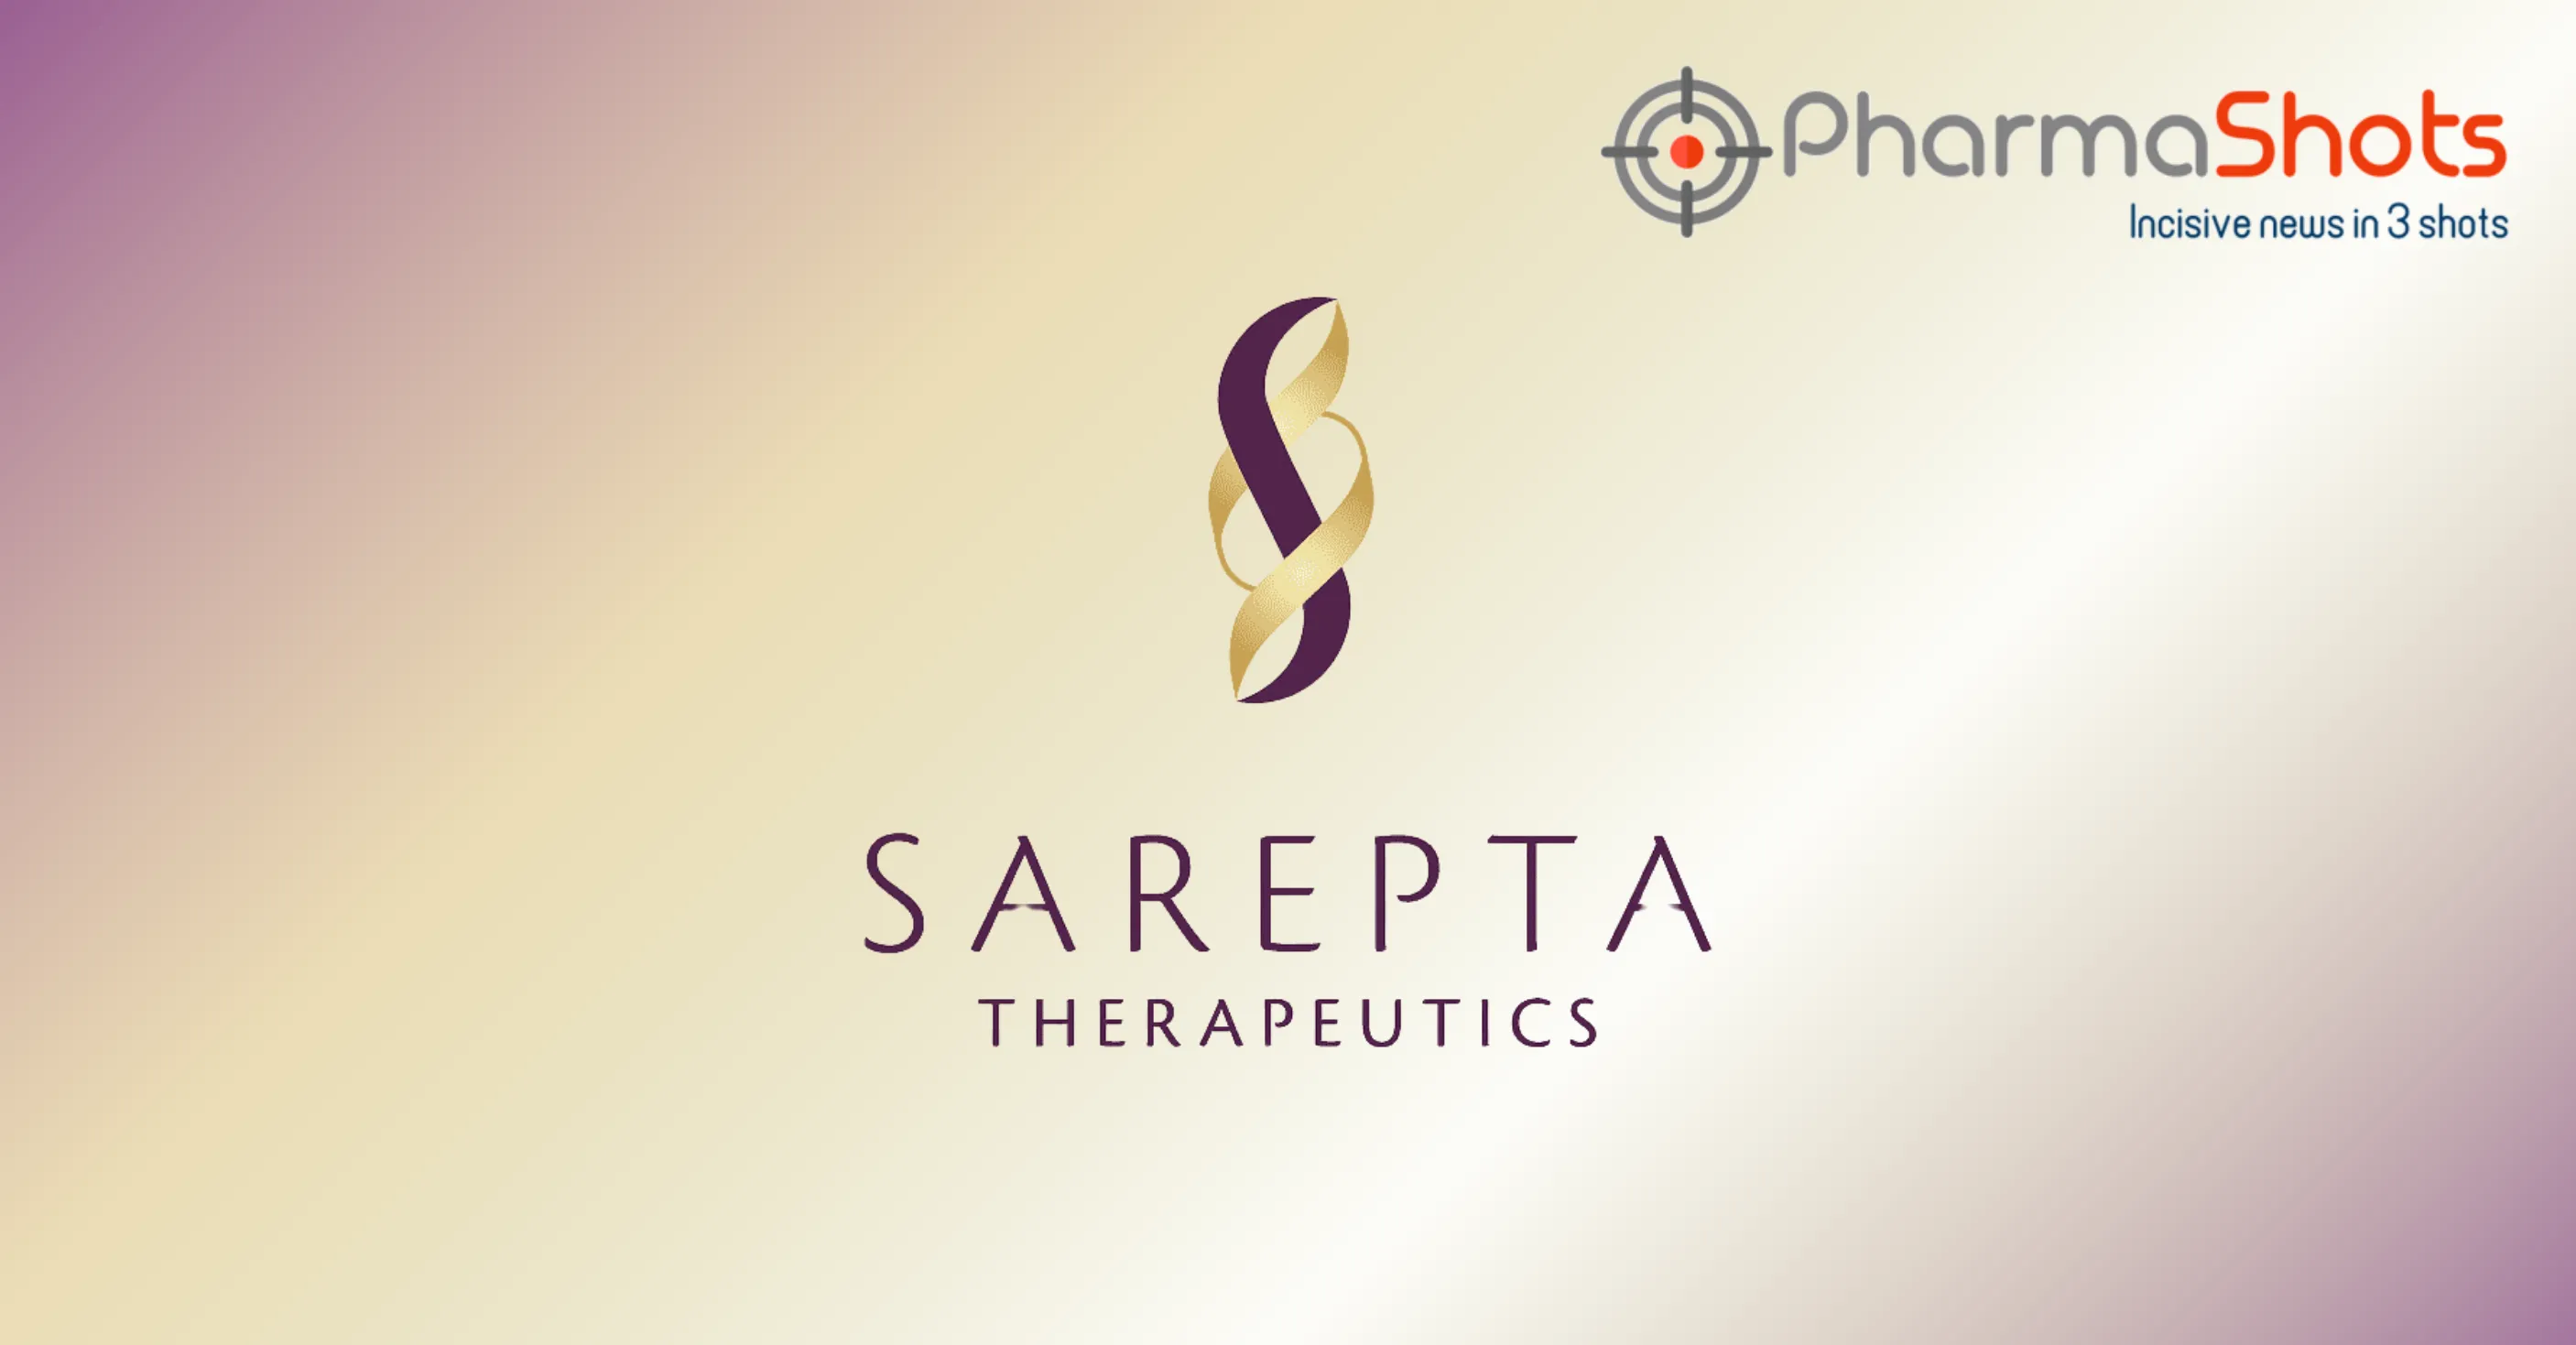 Sarepta Therapeutics’ Elevidys Gains the US FDA’s Label Expansion Approval for Duchenne Muscular Dystrophy